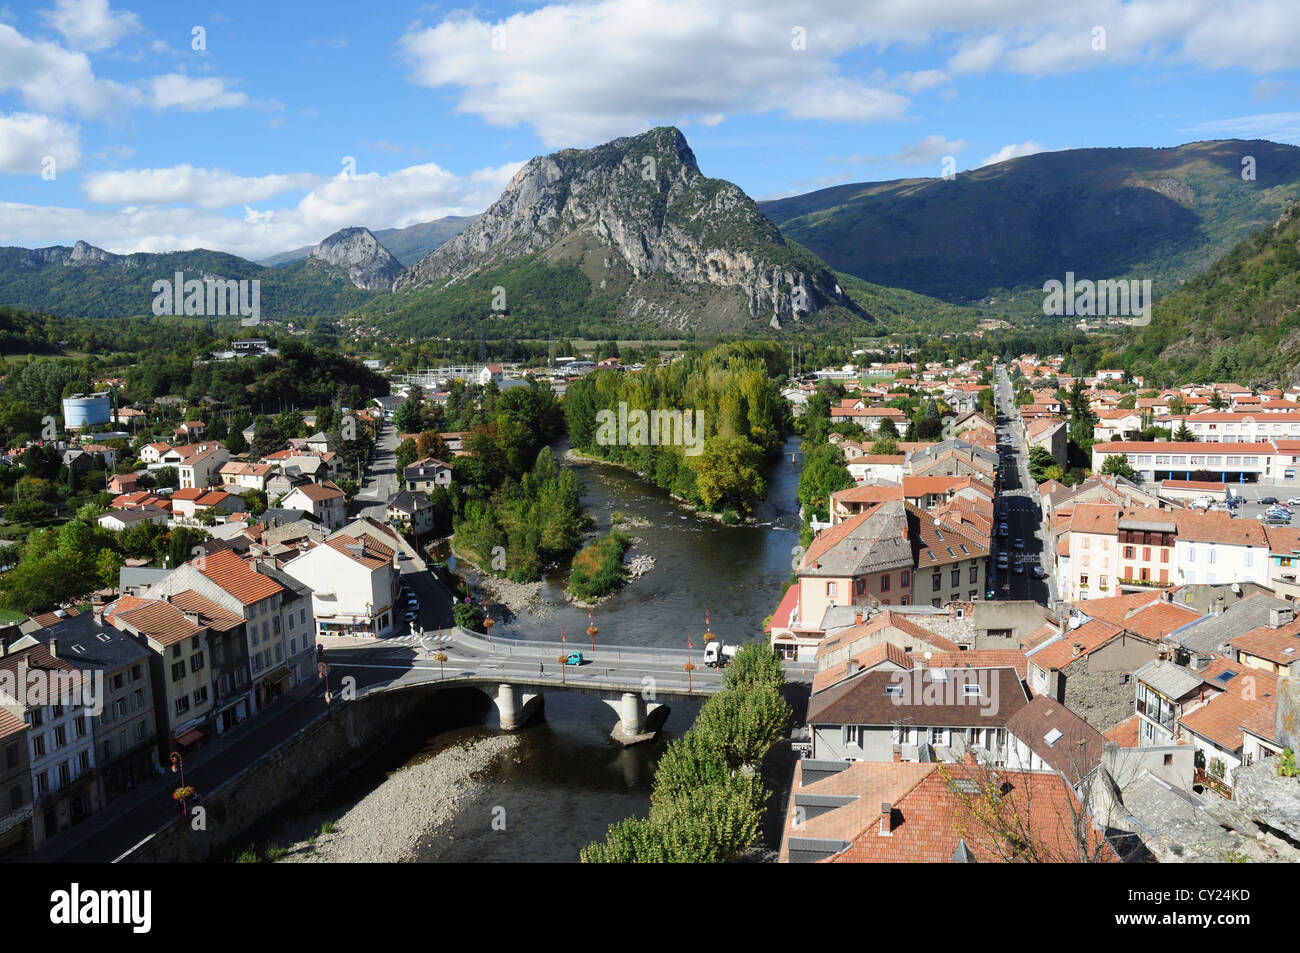 Overview of town, river and countryside, Tarascon-sur-Ariege, Ariege, Midi-Pyrenees, France Stock Photo